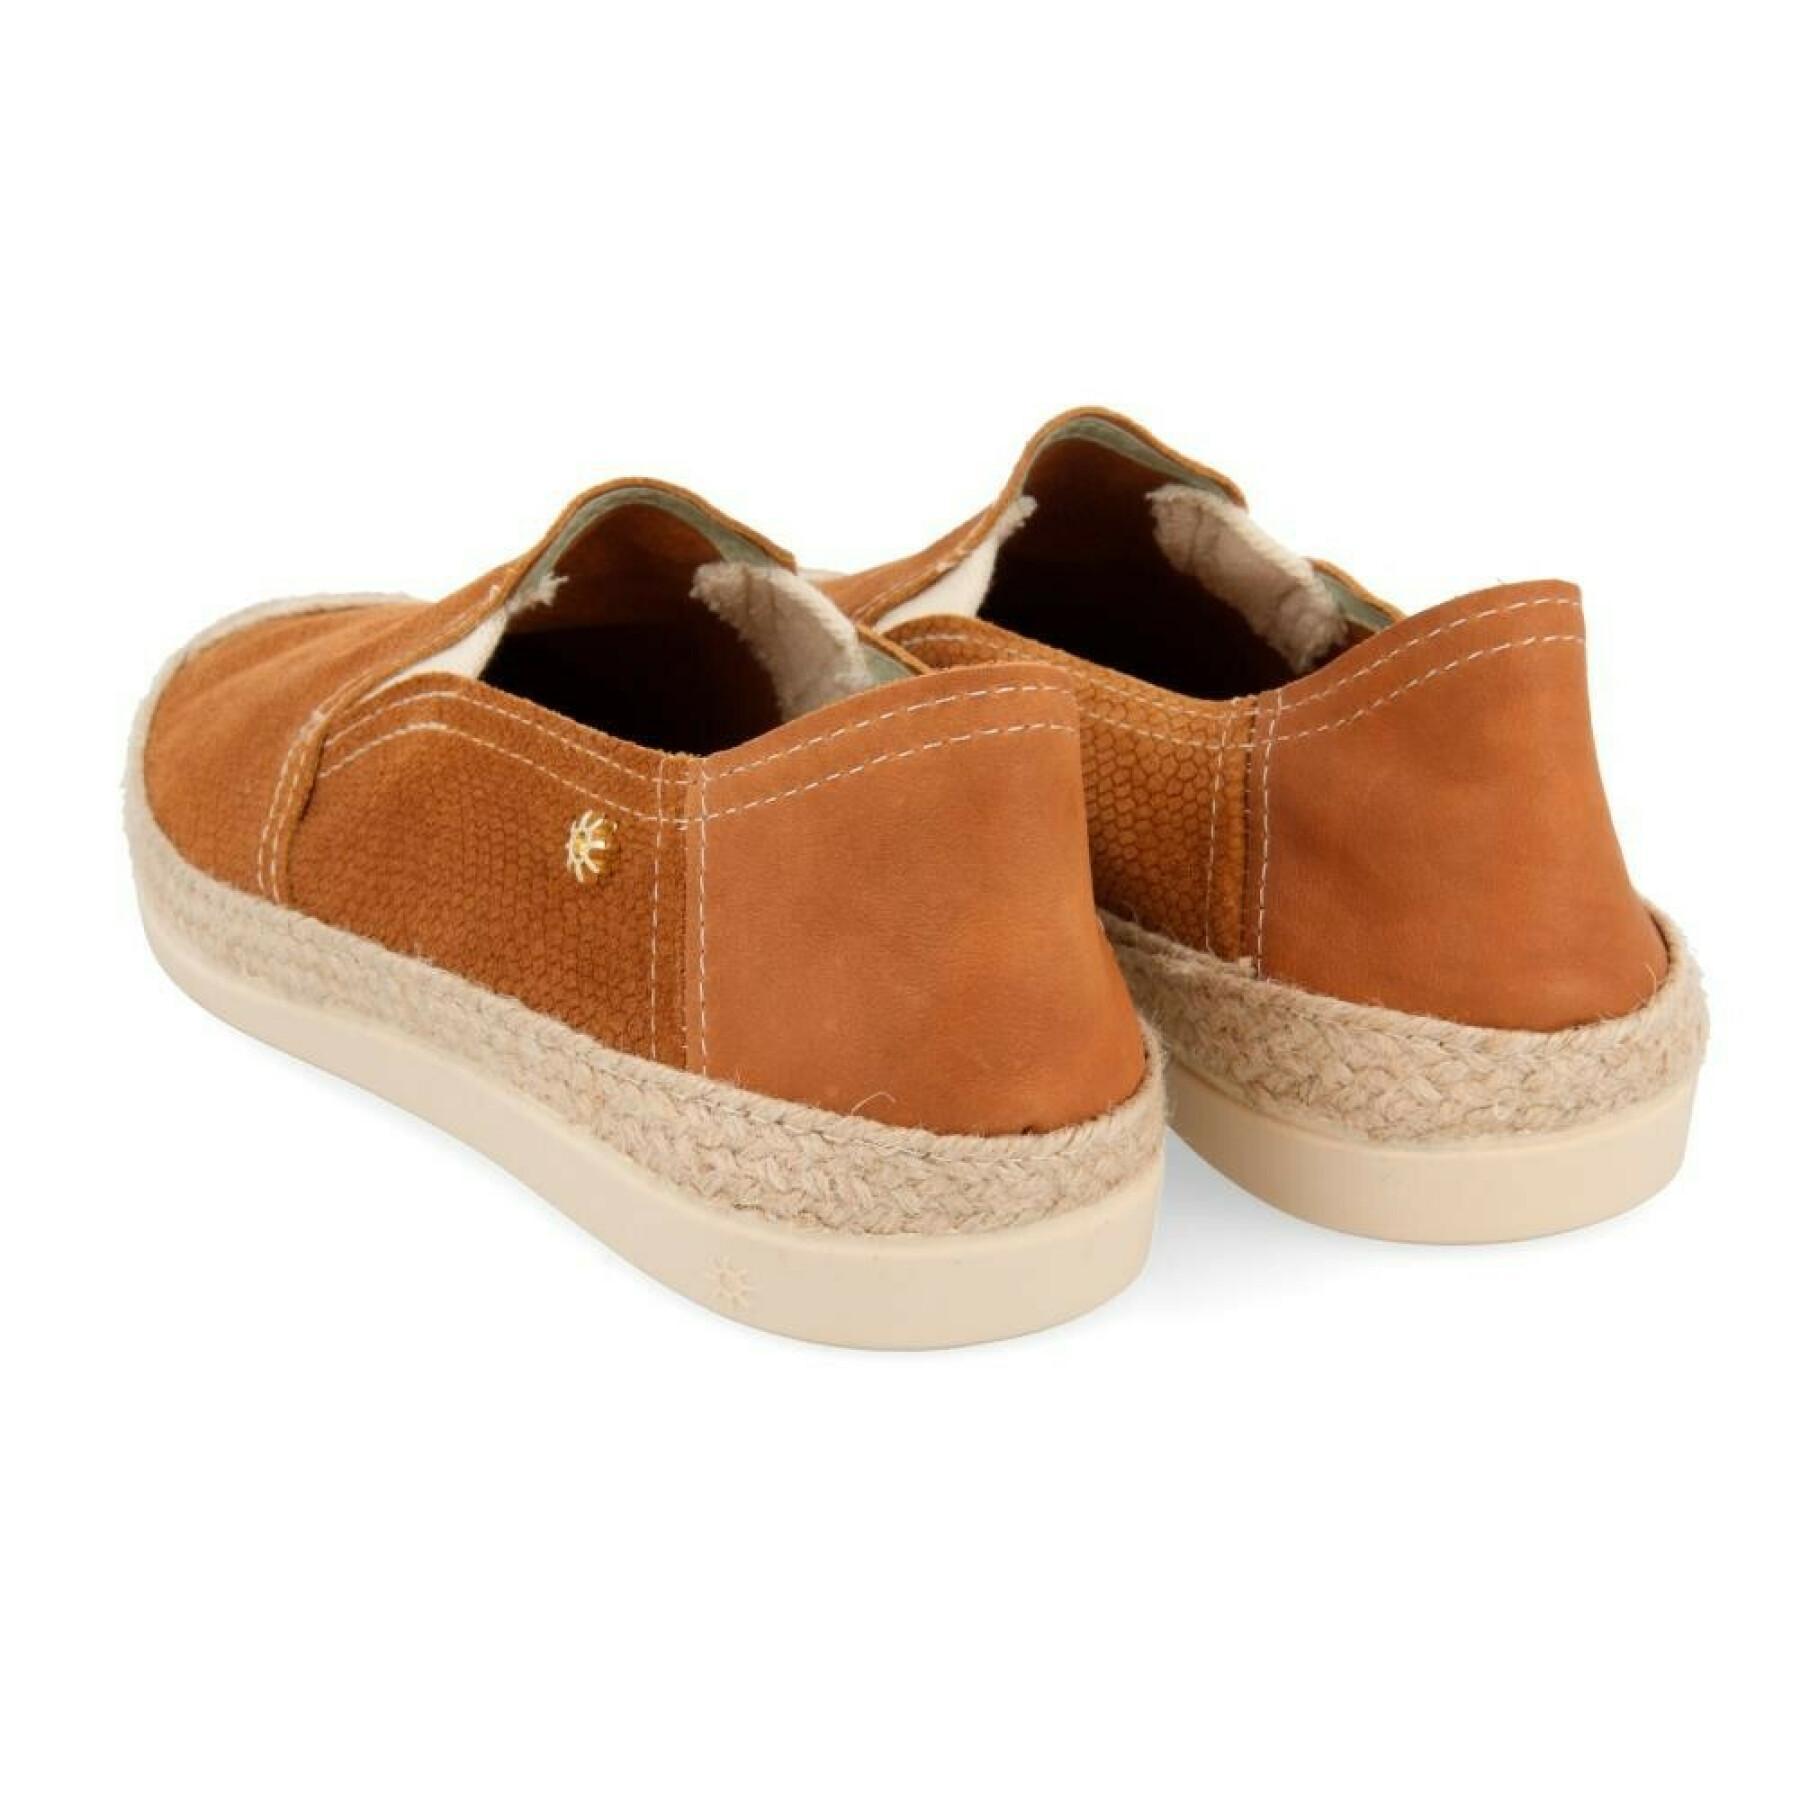 Espadrilles inspired by deep Spanish cultural roots La Siesta dianium